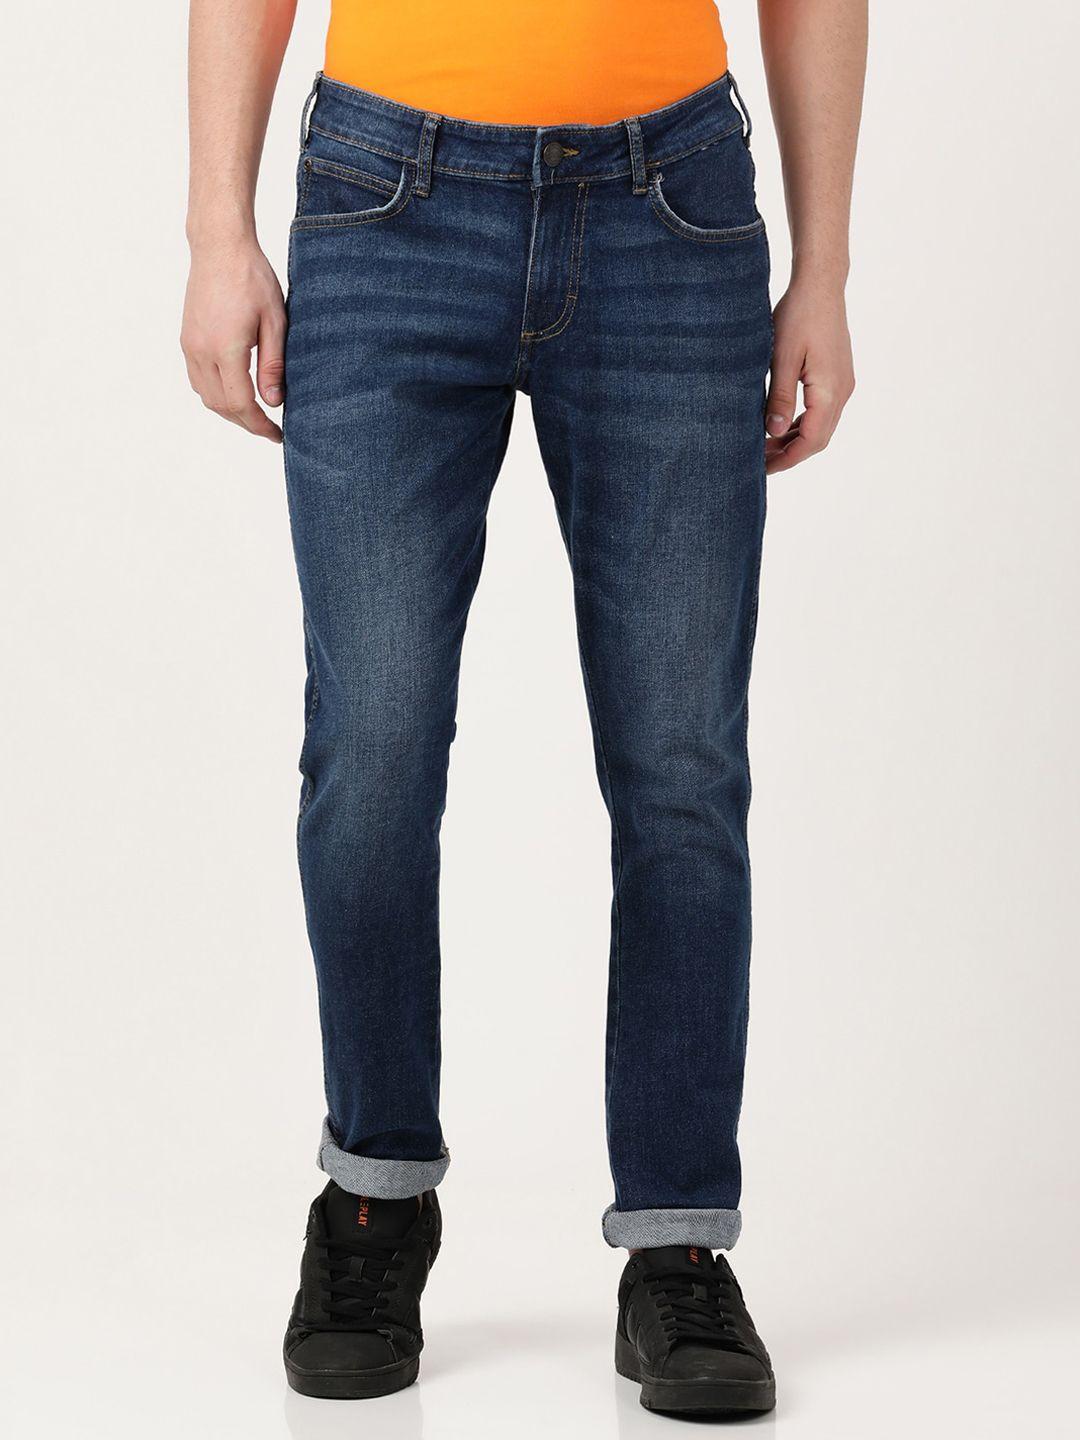 wrangler-men-vegas-skinny-fit-low-rise-heavy-fade-stretchable-cotton-jeans